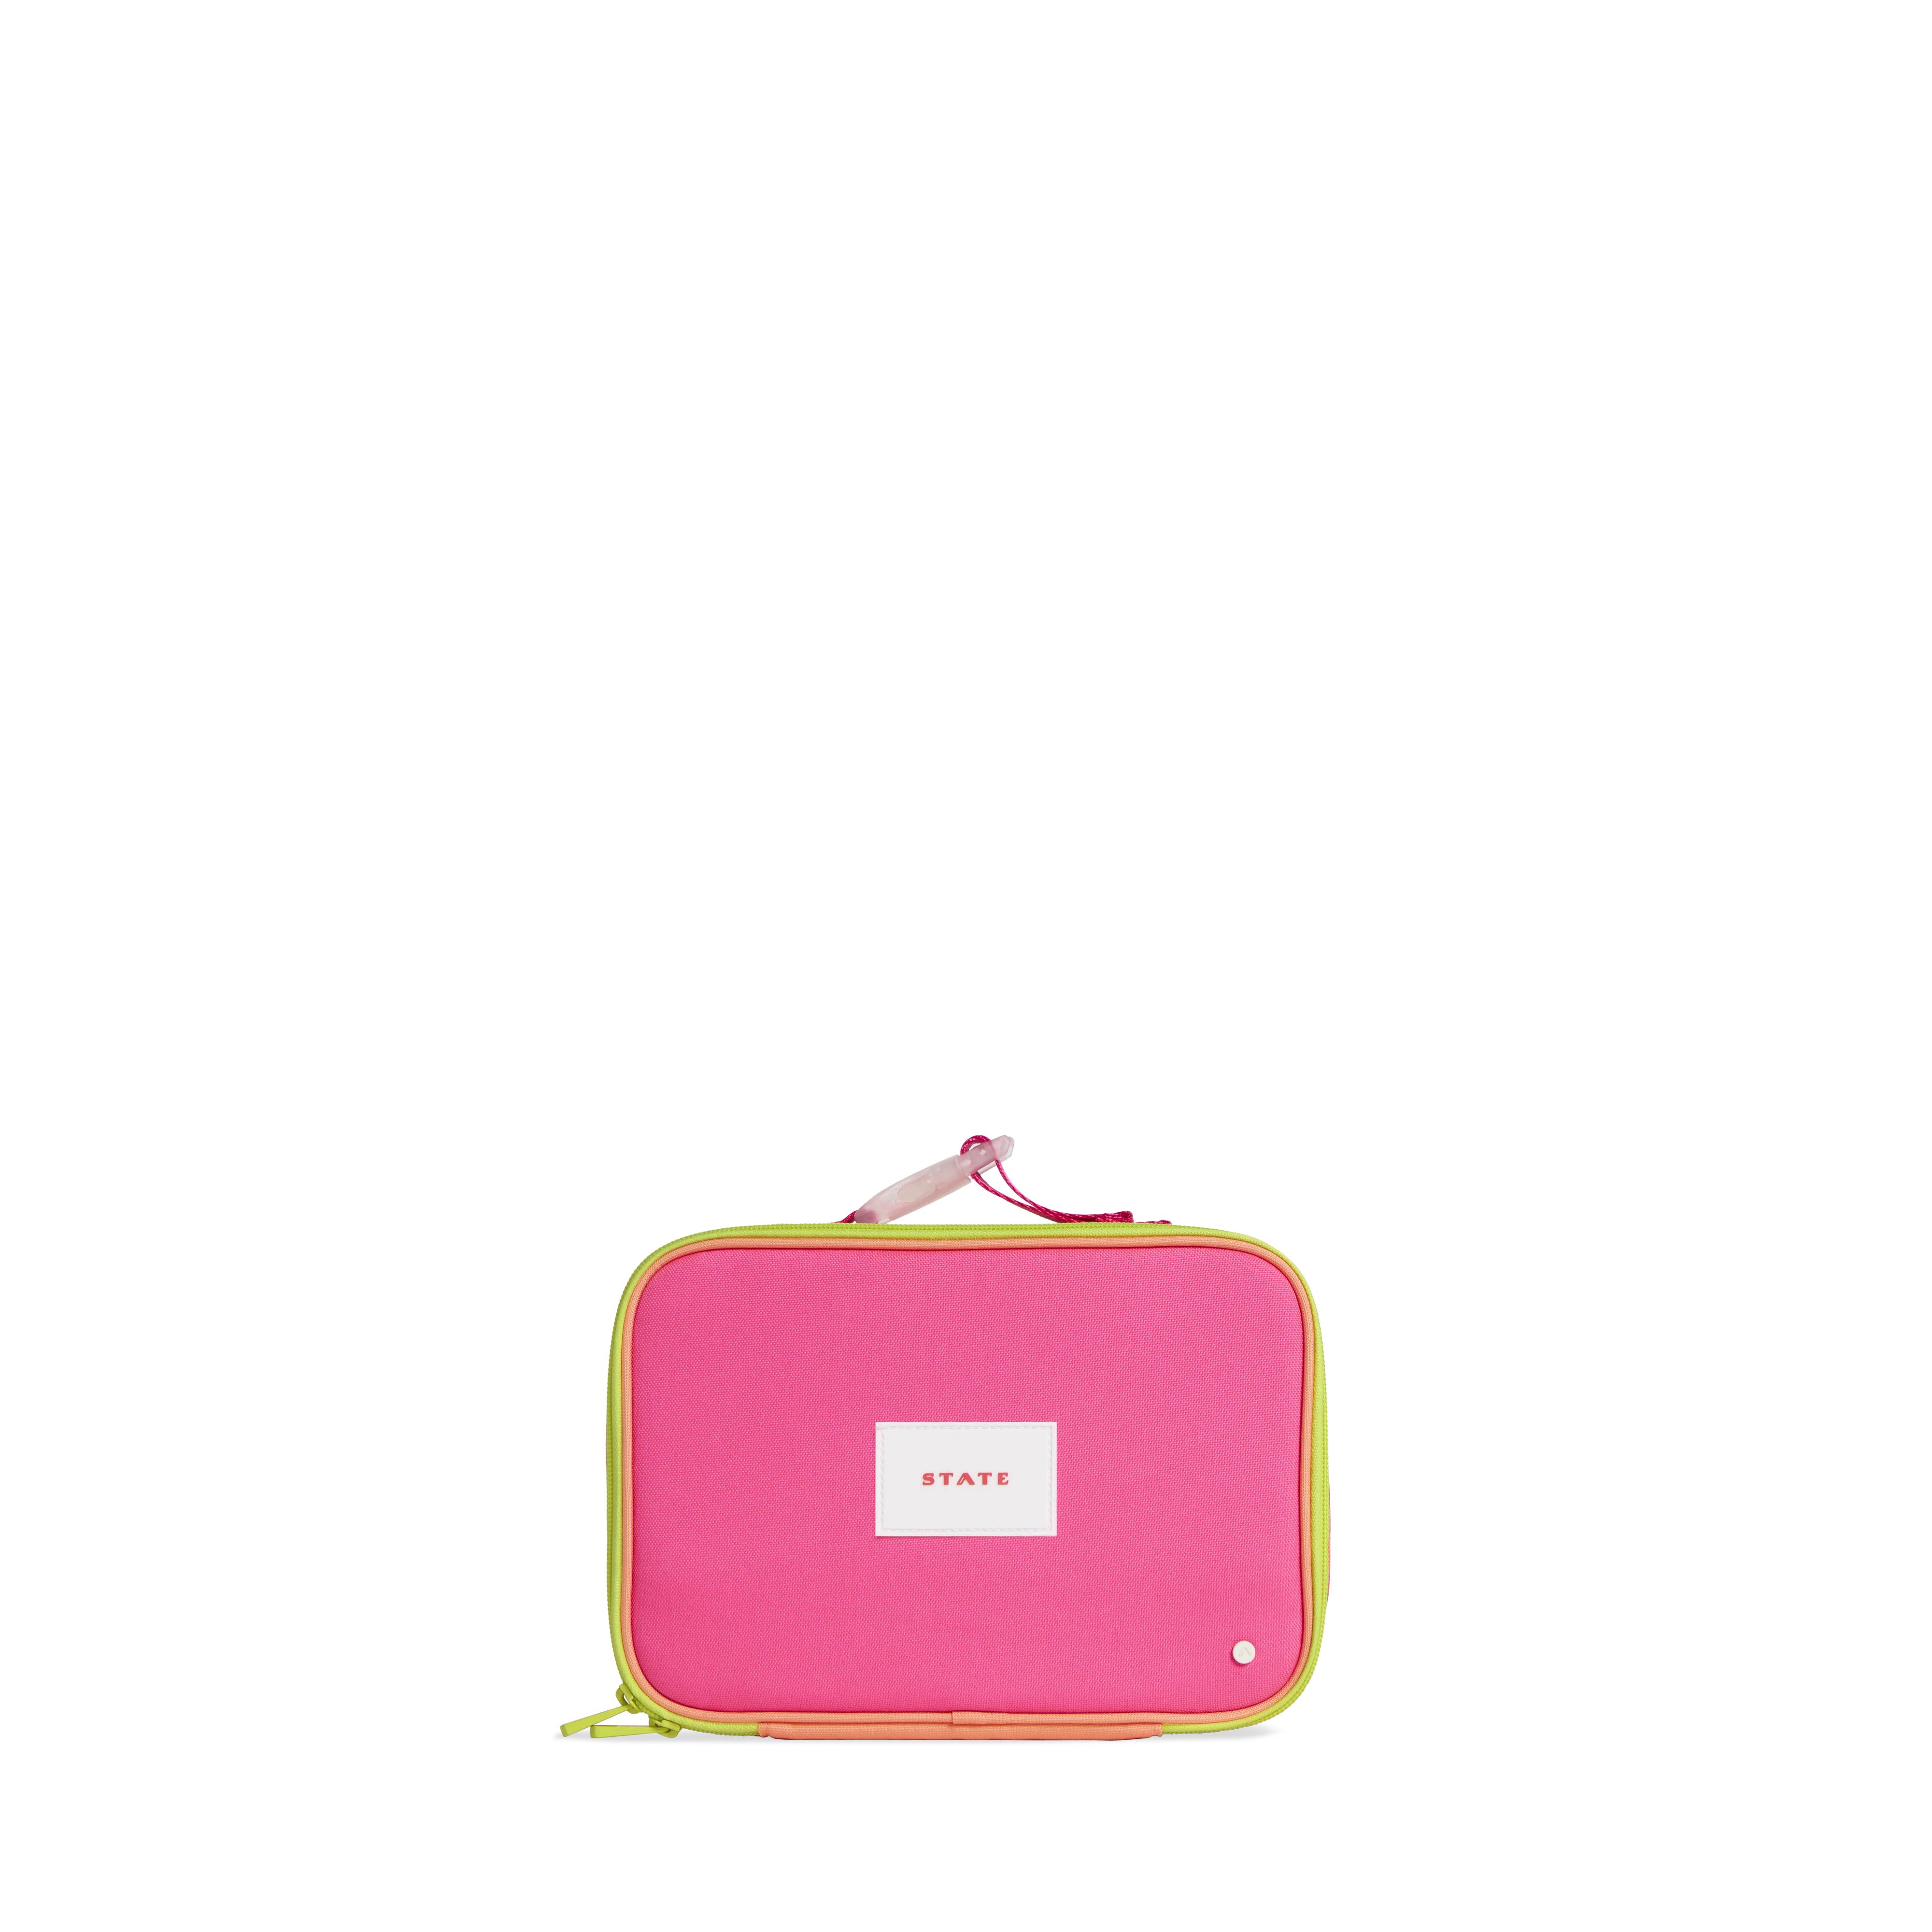 STATE Bags | Rodgers Lunch Box Color Block Orange/Pink | STATE Bags